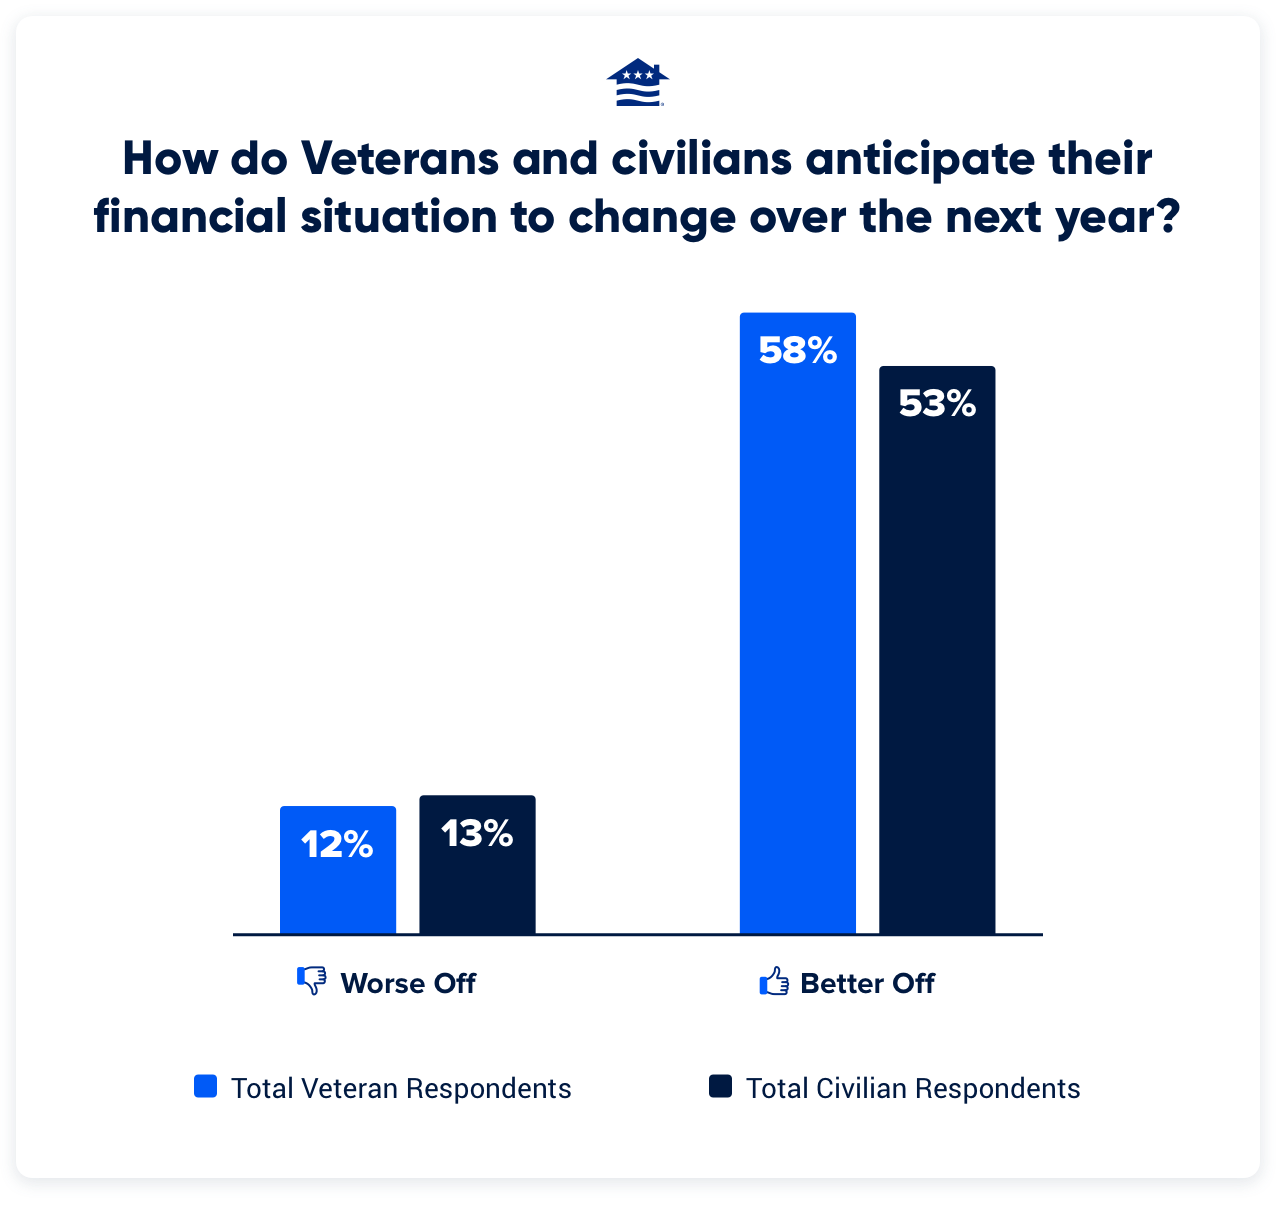 This bar chart shows that 58% of Veterans expect to be better off financially a year from now, compared to 53% of civilians.